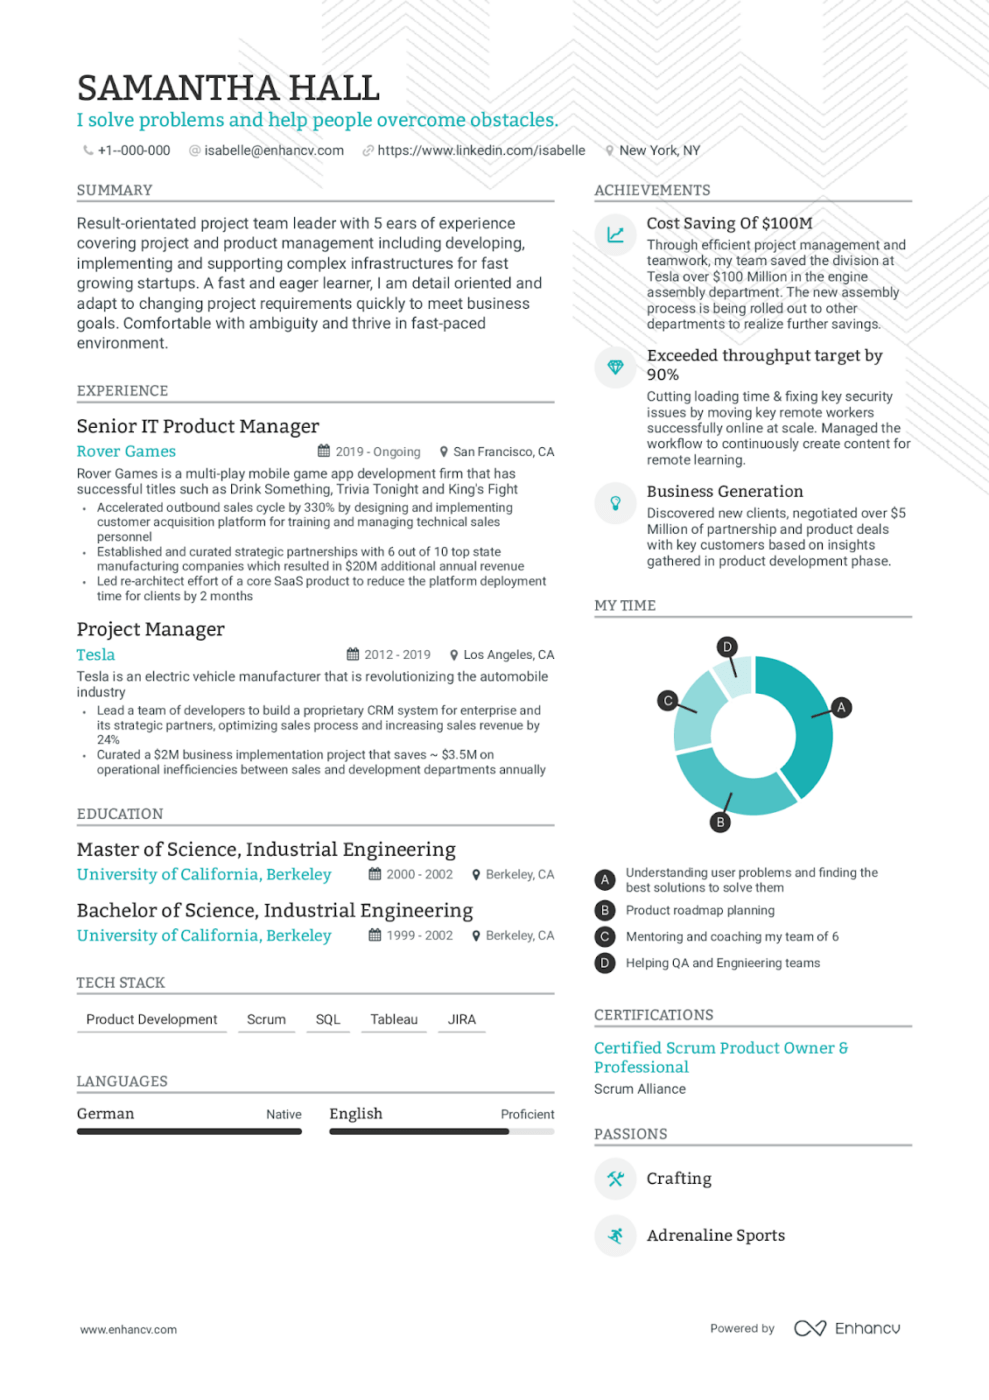 Resume format examples by Enhancv